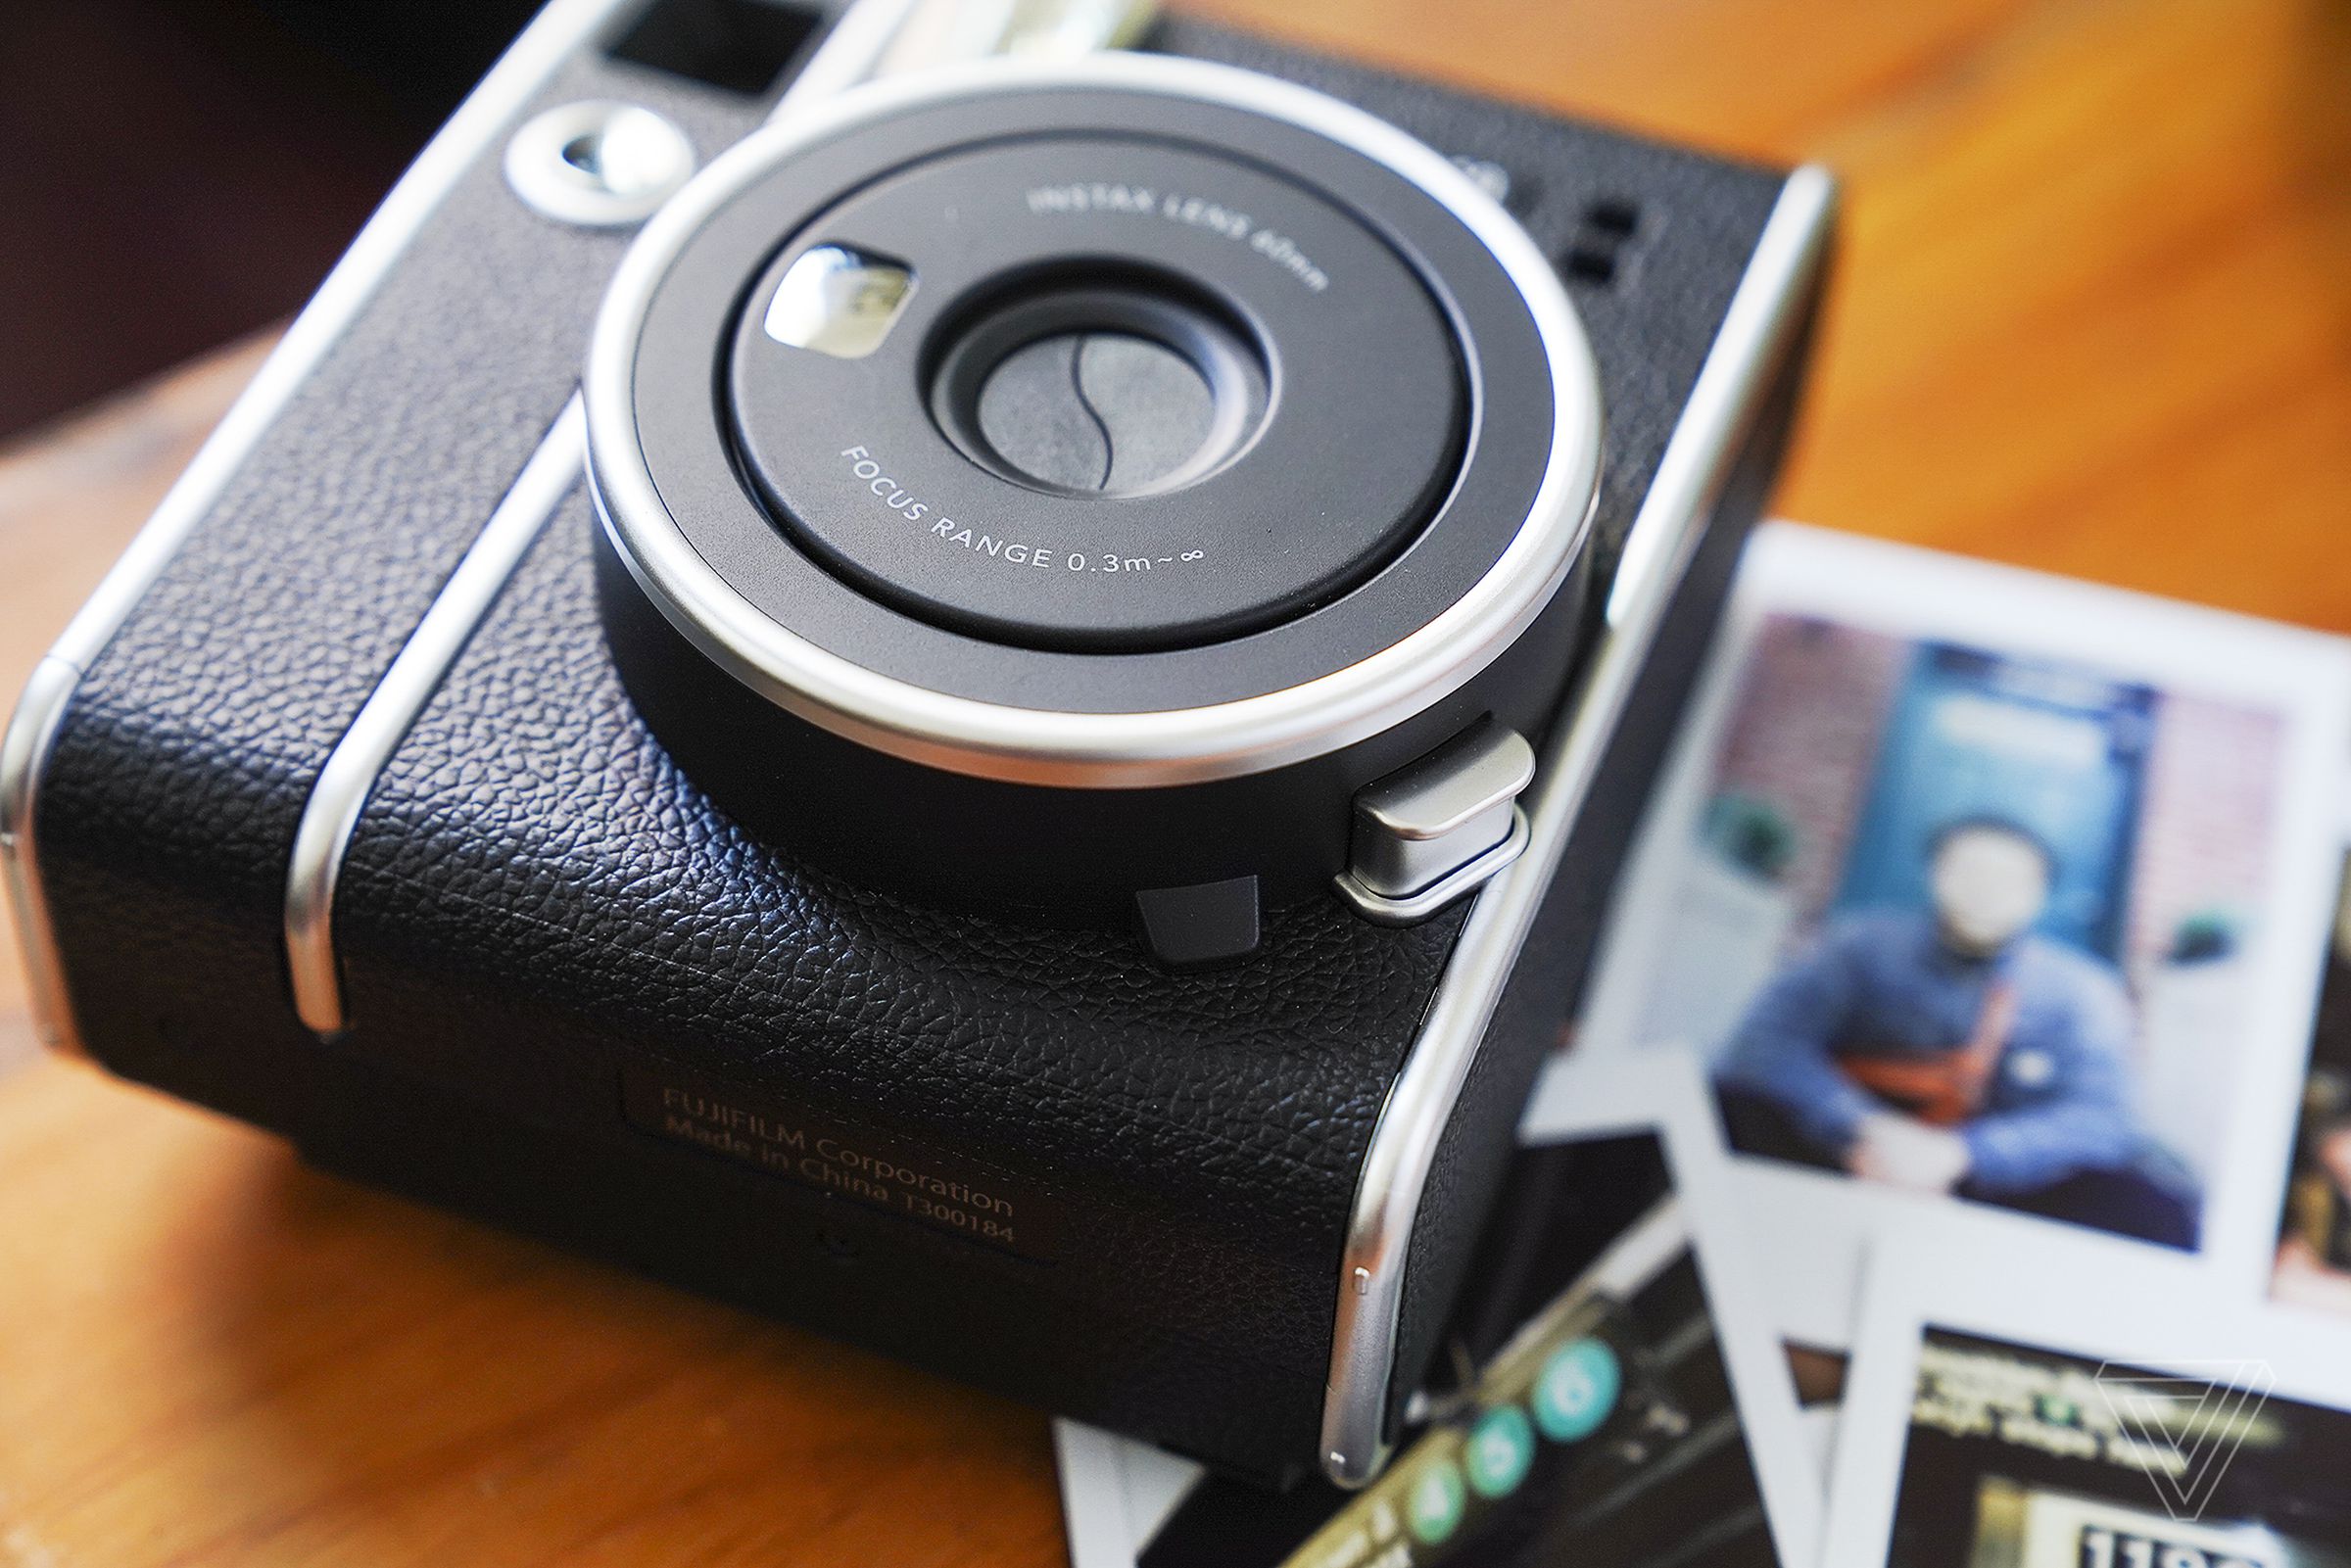 To turn on the Instax Mini 40, you push the silver button under the lens.